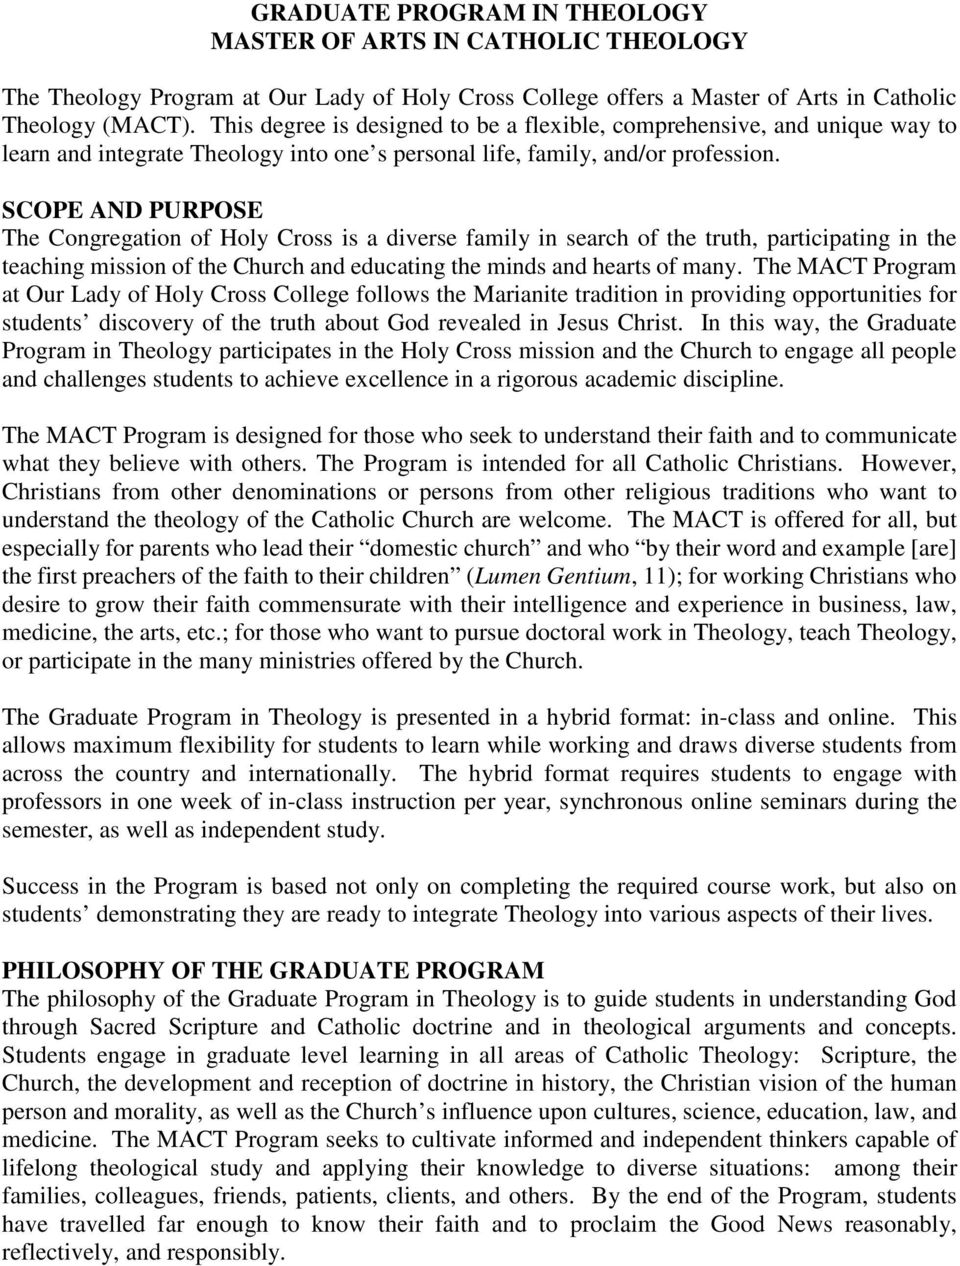 SCOPE AND PURPOSE The Congregation of Holy Cross is a diverse family in search of the truth, participating in the teaching mission of the Church and educating the minds and hearts of many.